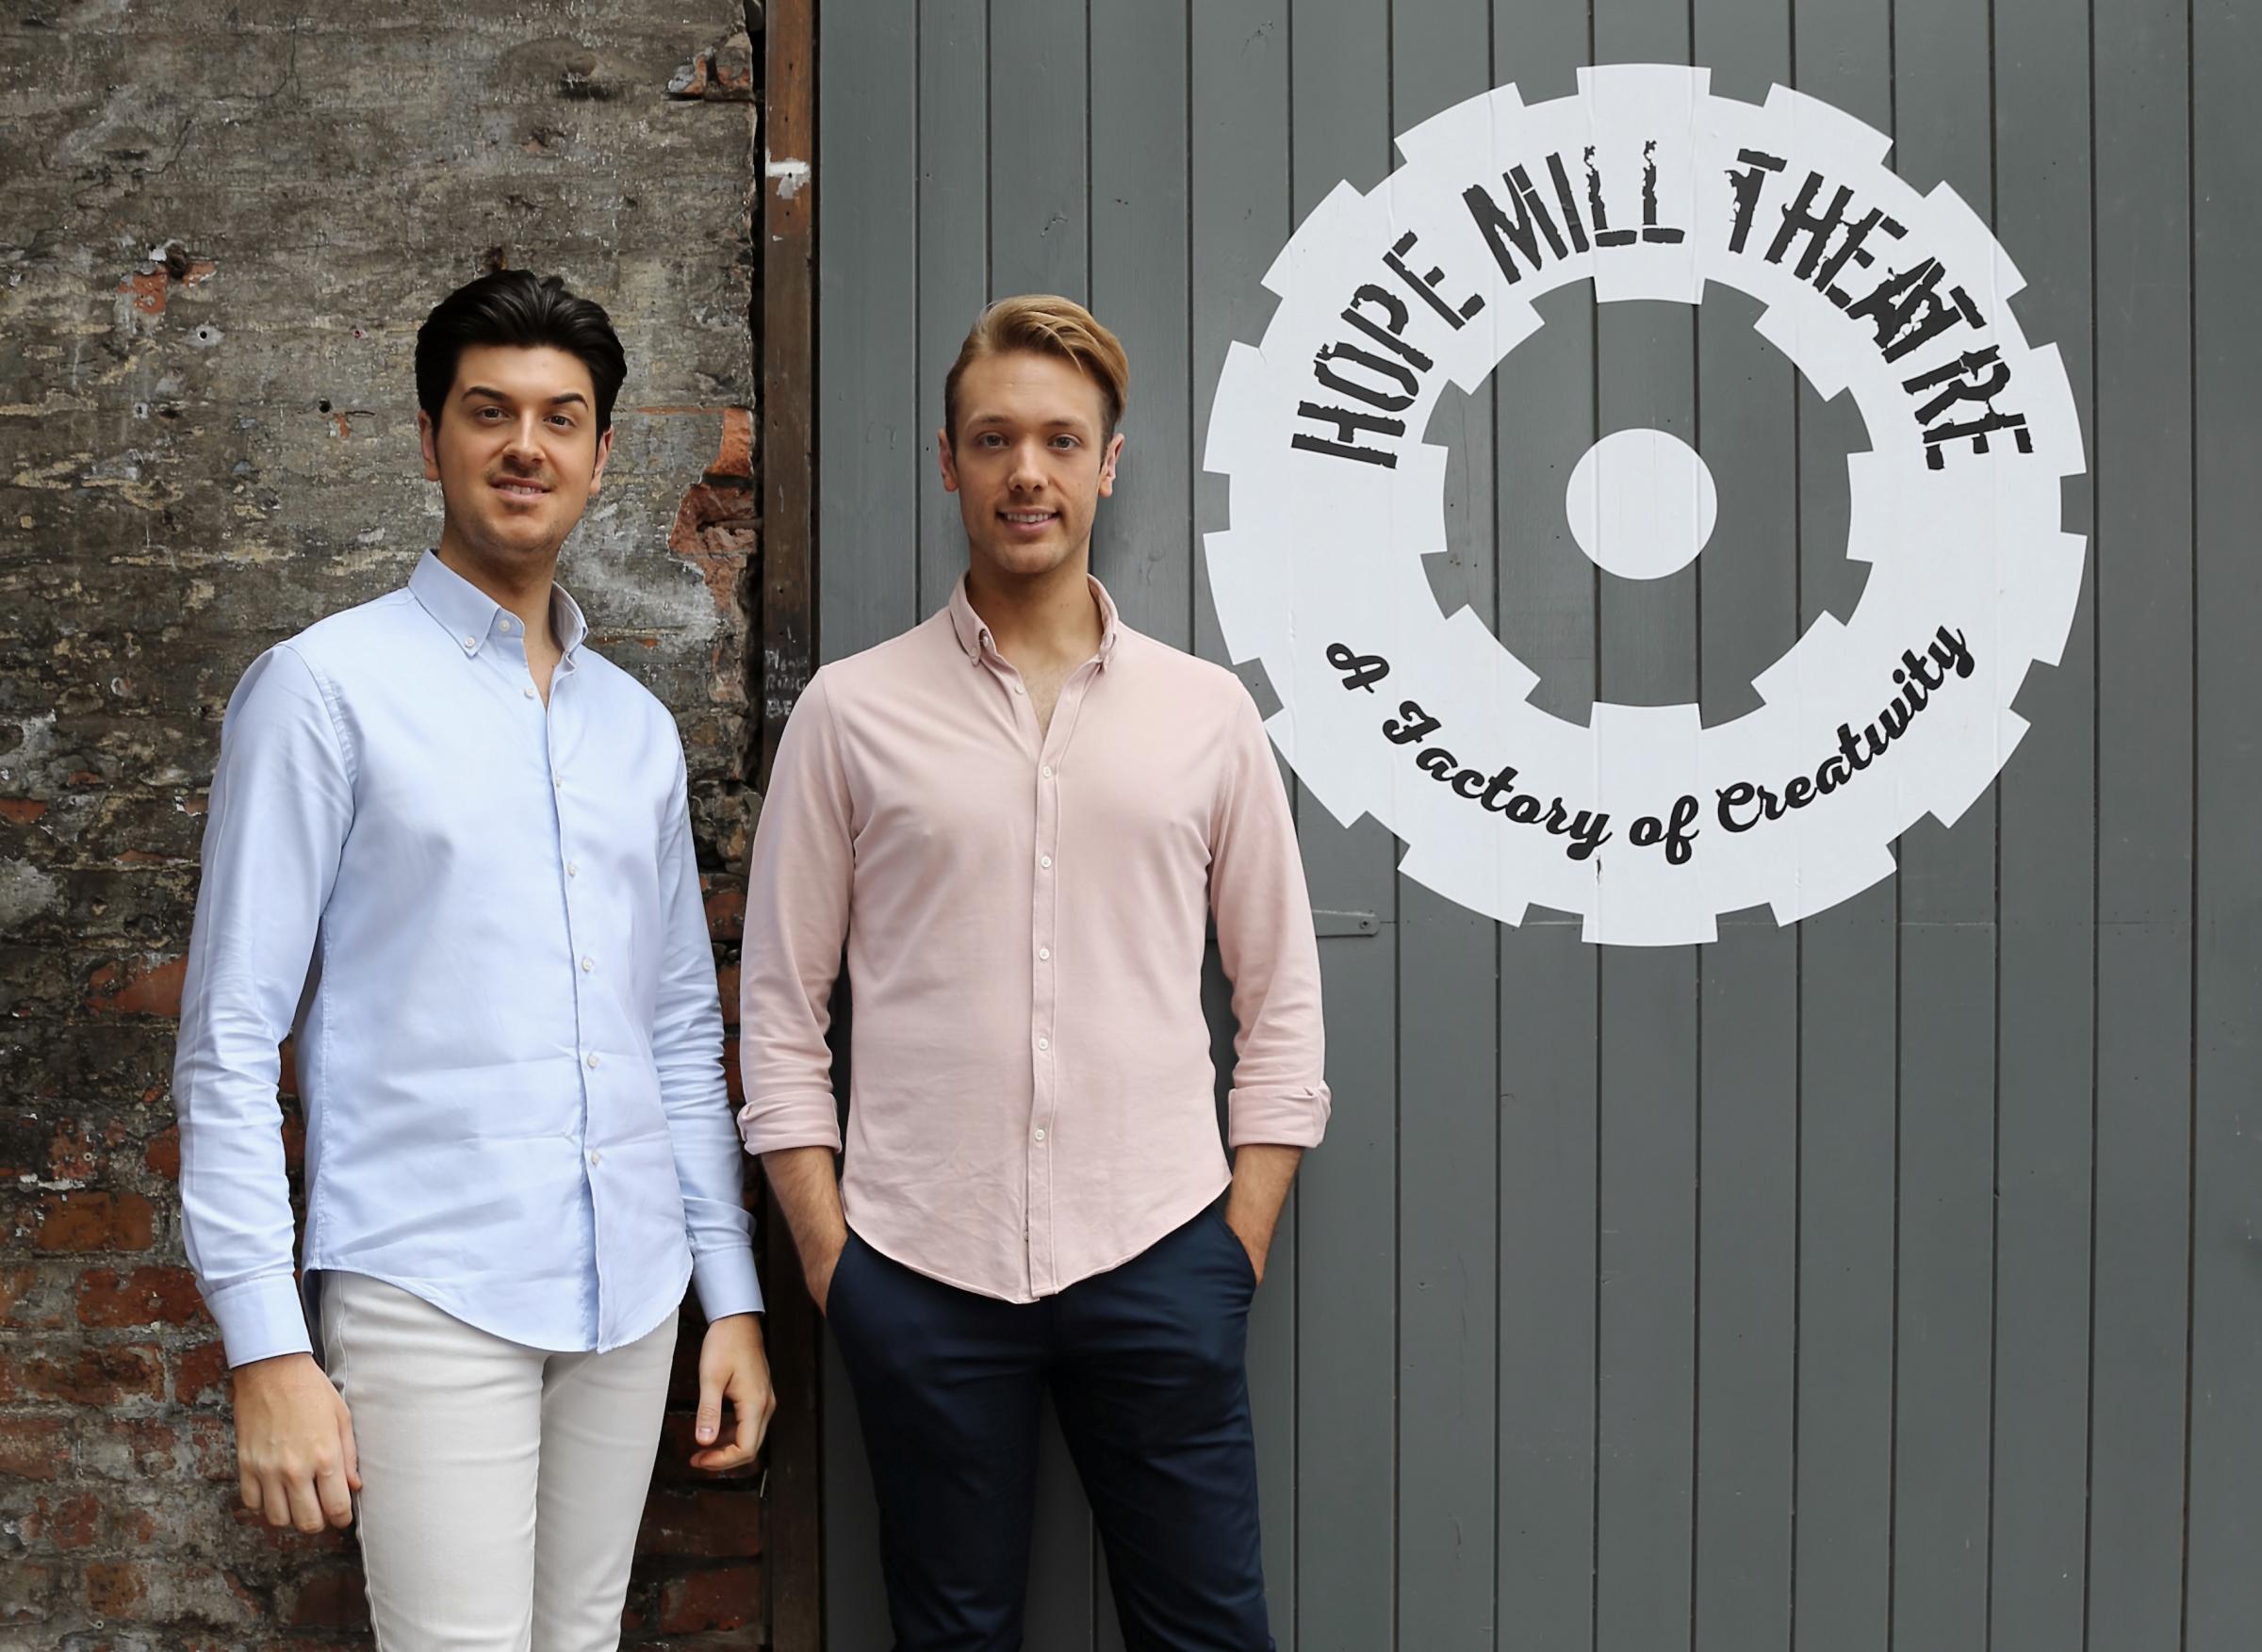 Joseph Houston and Will Whelton at Hope Mill Theatre